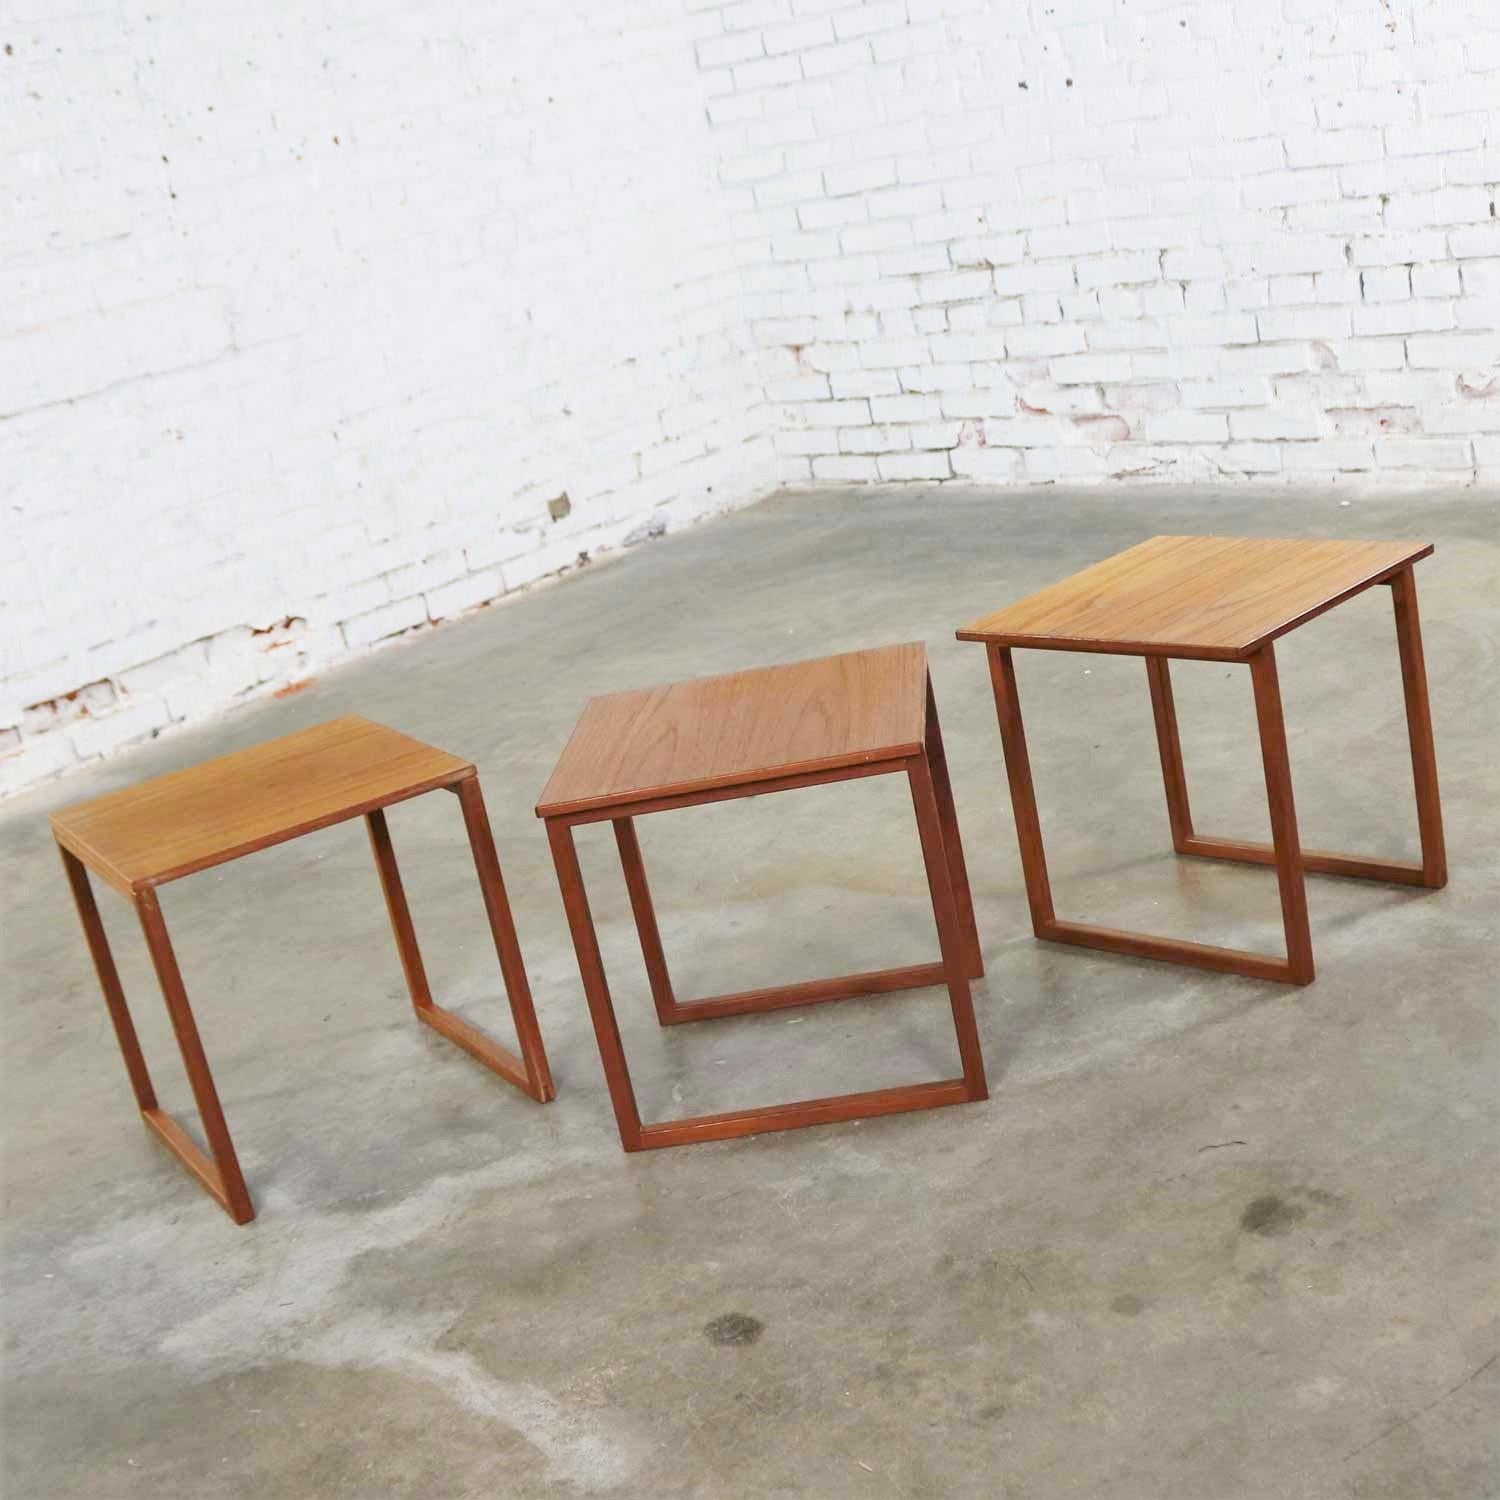 Handsome set of three interlocking Scandinavian Modern teak cube nesting tables which is designed by Kai Kristiansen for Vildbjerg Mobelfabrik. This set is in fabulous vintage condition with no outstanding flaws we have seen. Please see photos,